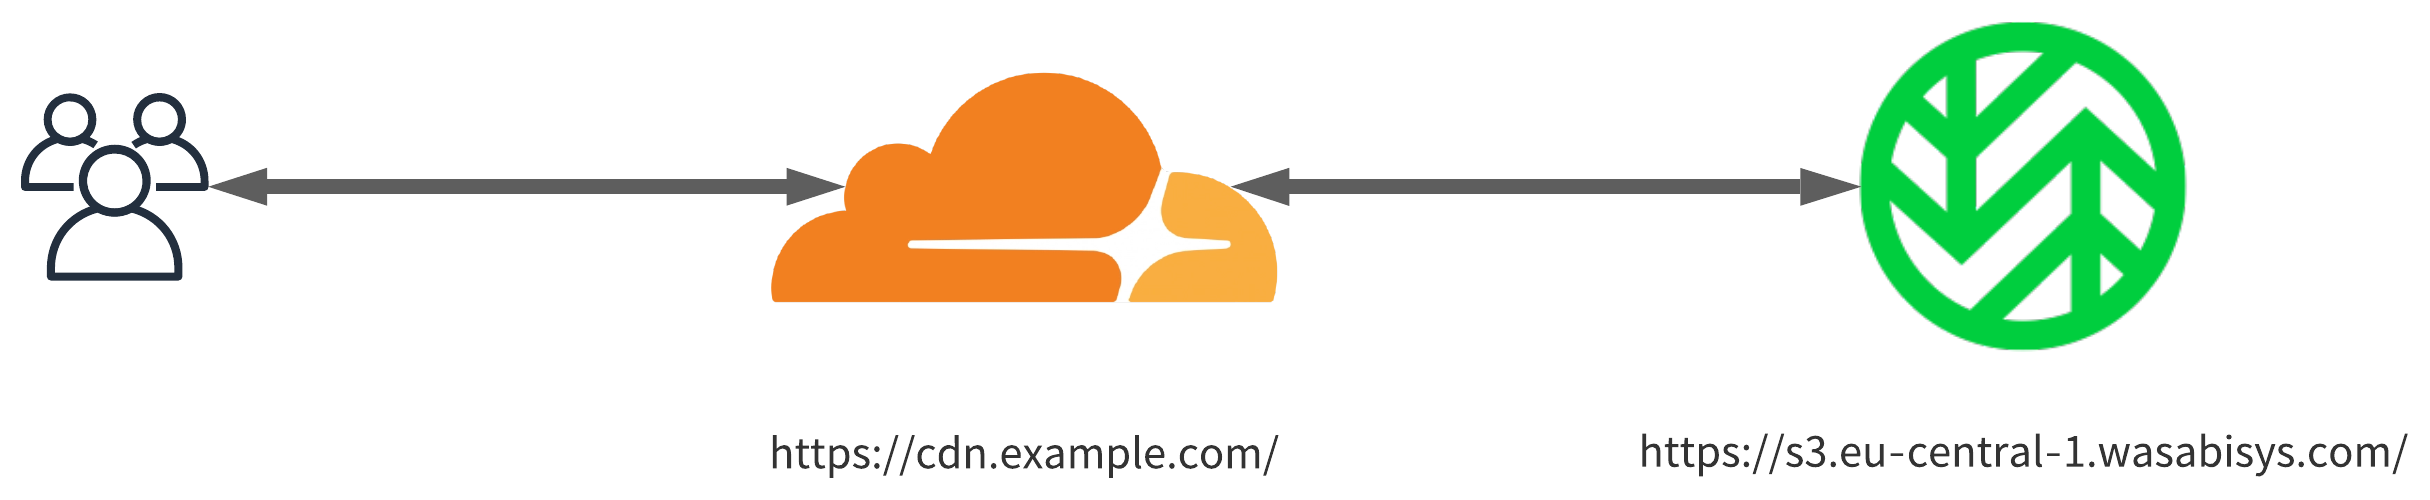 Cloudflare cached static files and served them